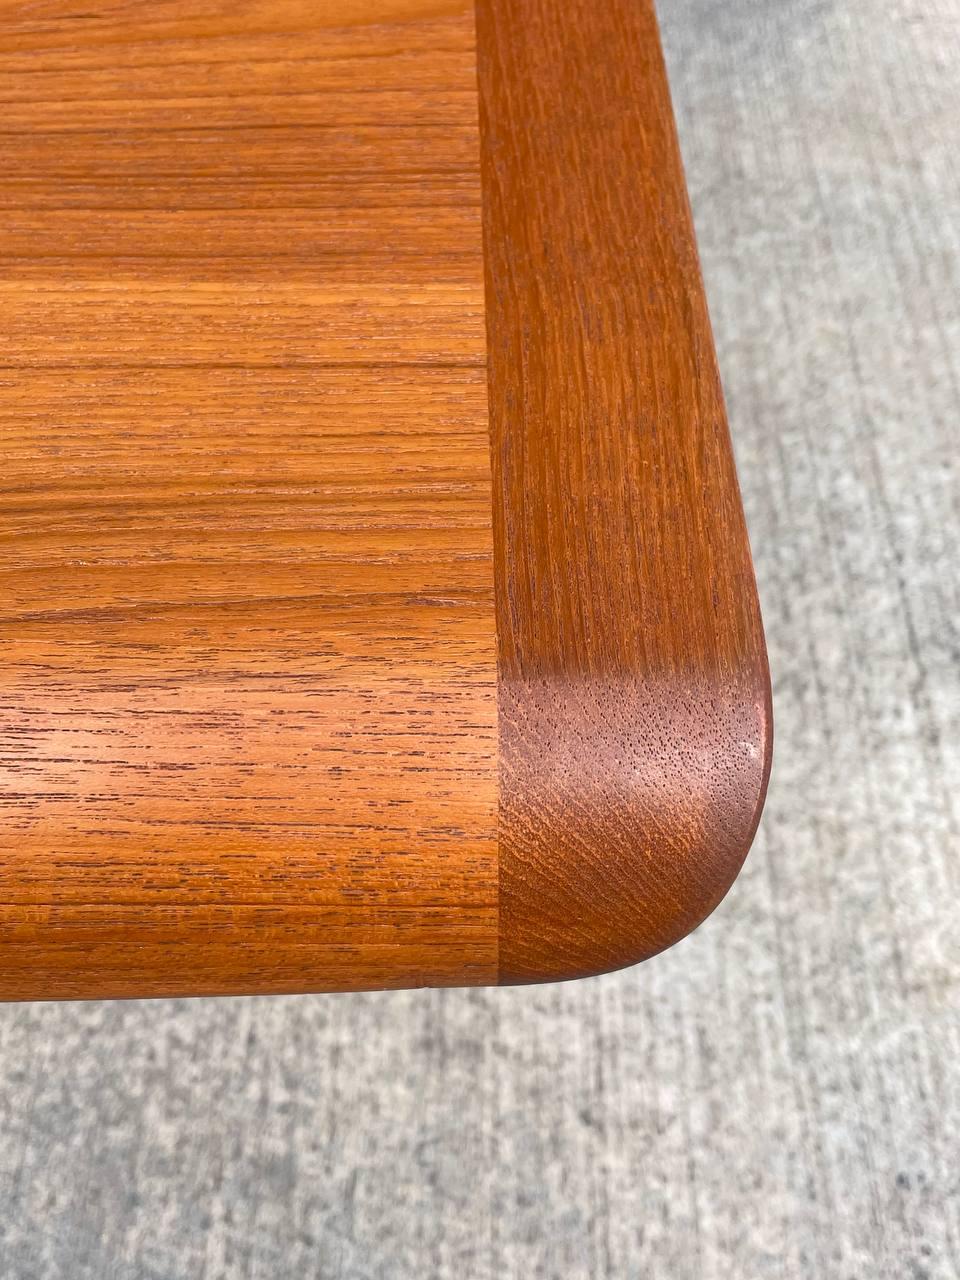 Newly Refinished - Mid-Century Danish Modern Teak Coffee Table by Vejle Stole For Sale 4